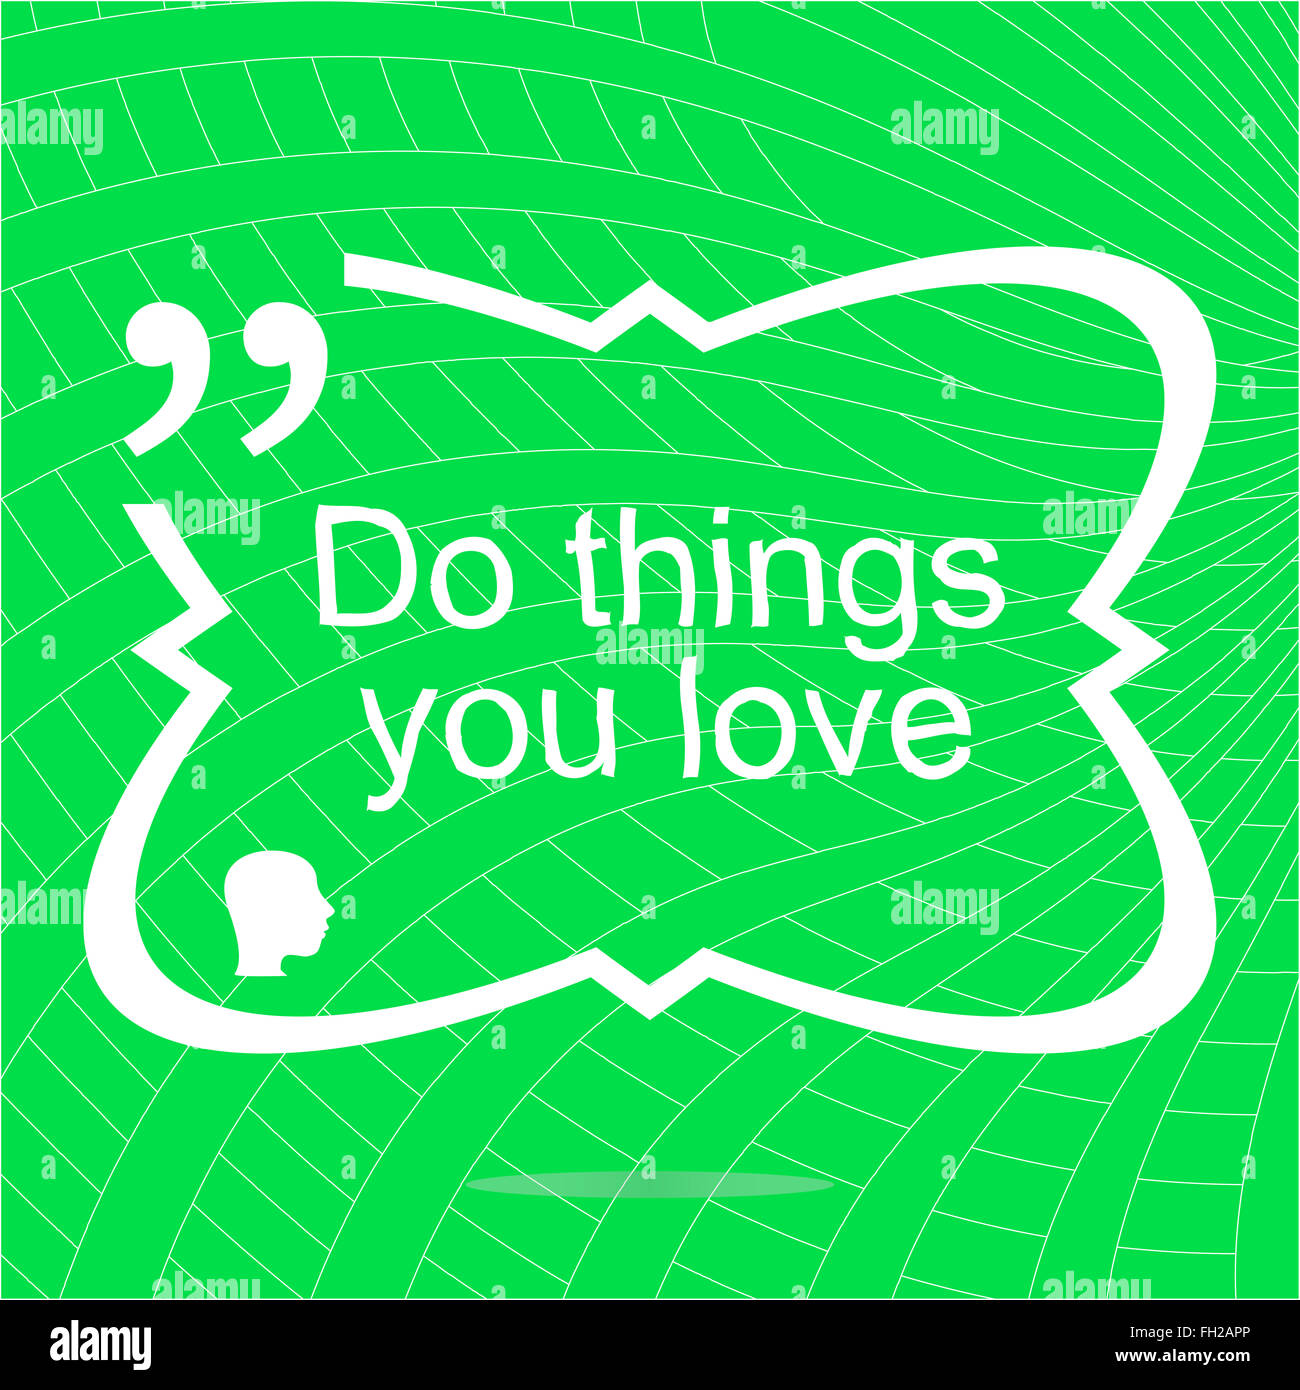 Do things you love. Inspirational motivational quote. Simple trendy design. Positive quote Stock Photo